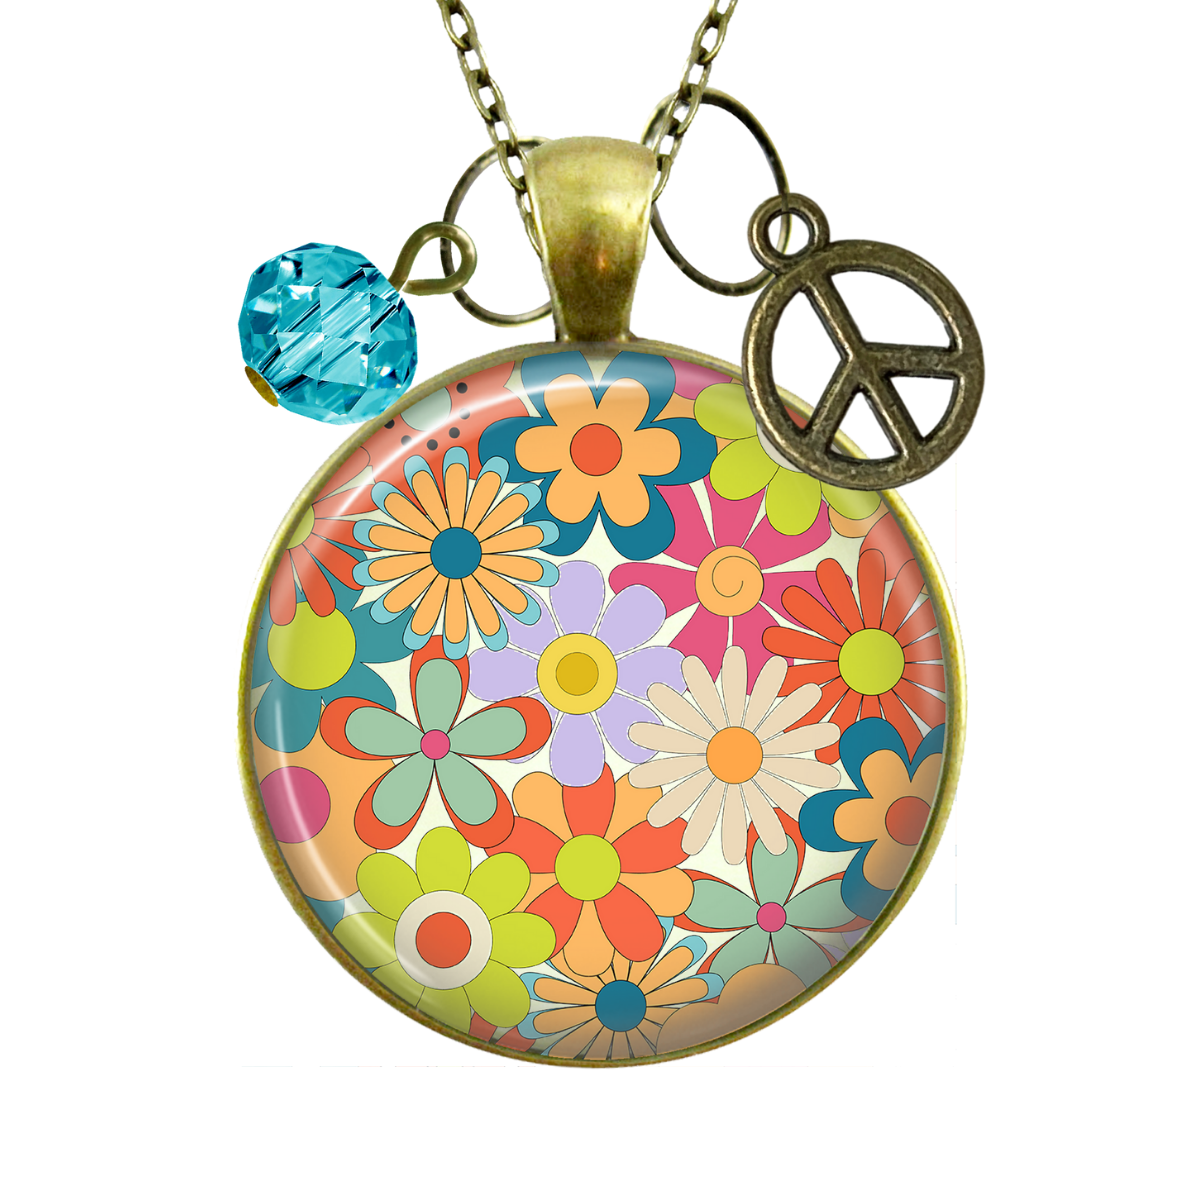 Groovy Flowers 70s Fashion Inspired Retro Necklace Bronze Pendant Summer Style Peace Symbol Charm  Necklace - Gutsy Goodness Handmade Jewelry